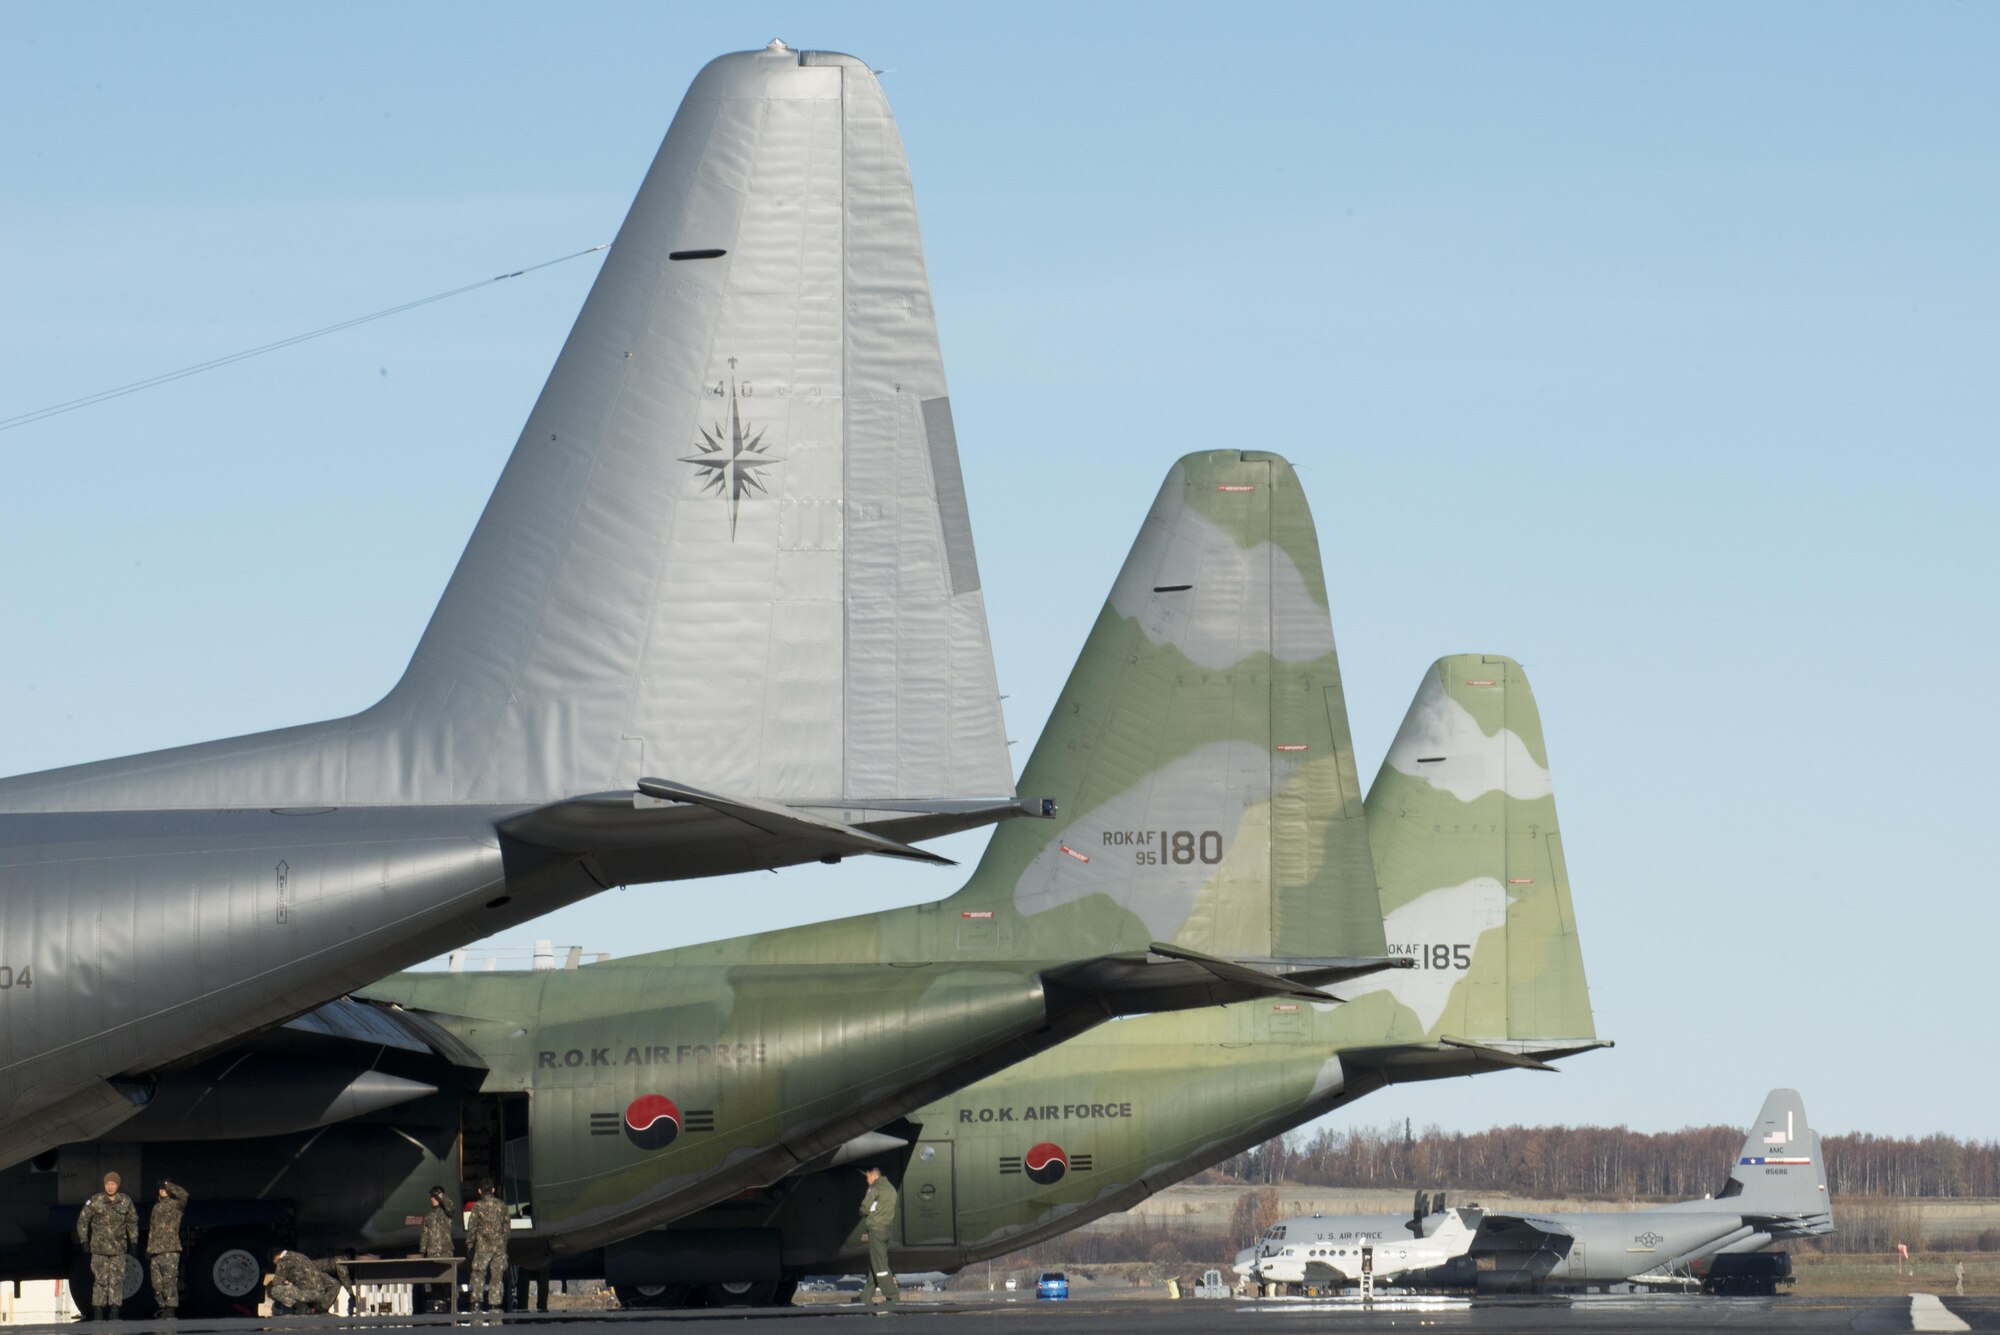 A Royal New Zealand Air Force C-130 Hercules and two Republic of Korea Air Force C-130 Hercules wait on the Joint Base Elmendorf-Richardson, Alaska flightline for their next Red Flag-Alaska 17-1 mission, Oct. 12, 2016. Red Flag-Alaska exercises are focused on improving the combat readiness of U.S. and international forces and providing training for units preparing for air expeditionary force taskings. 